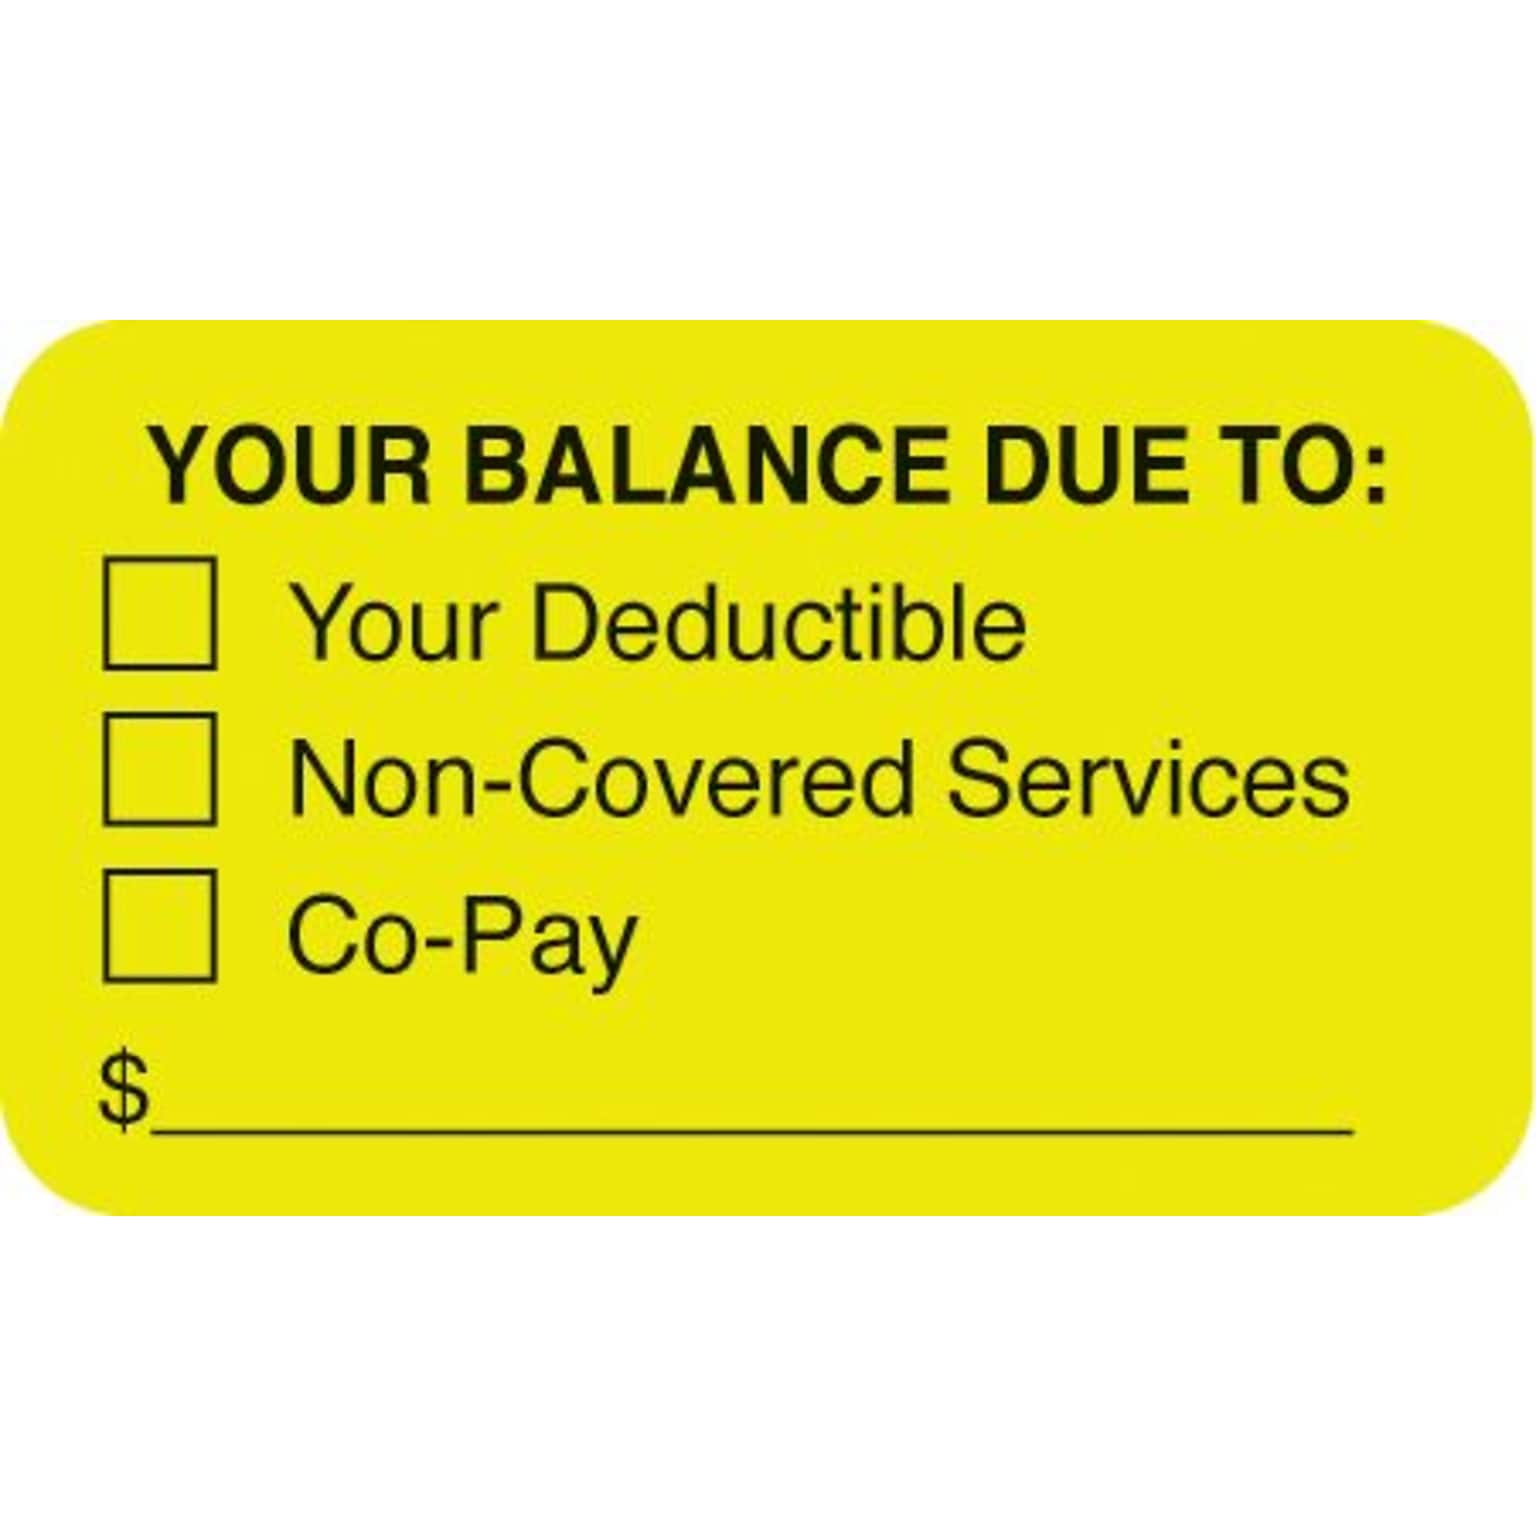 Medical Arts Press® Patient Insurance Labels, Your Balance Due To:, Fluorescent Chartreuse, 7/8x1-1/2, 500 Labels